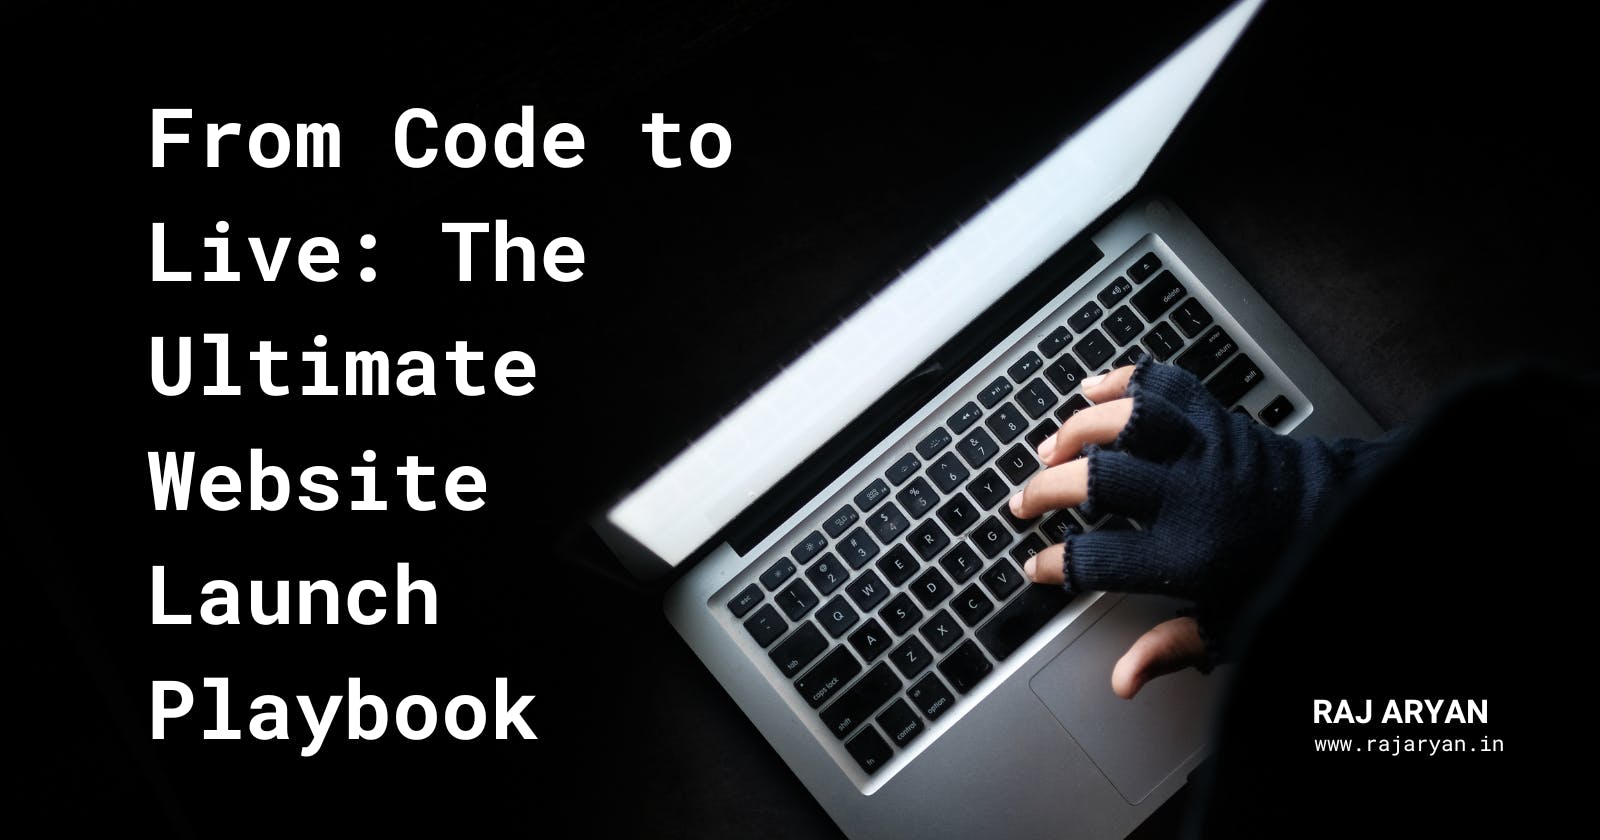 From Code to Live: The Ultimate Website Launch Playbook